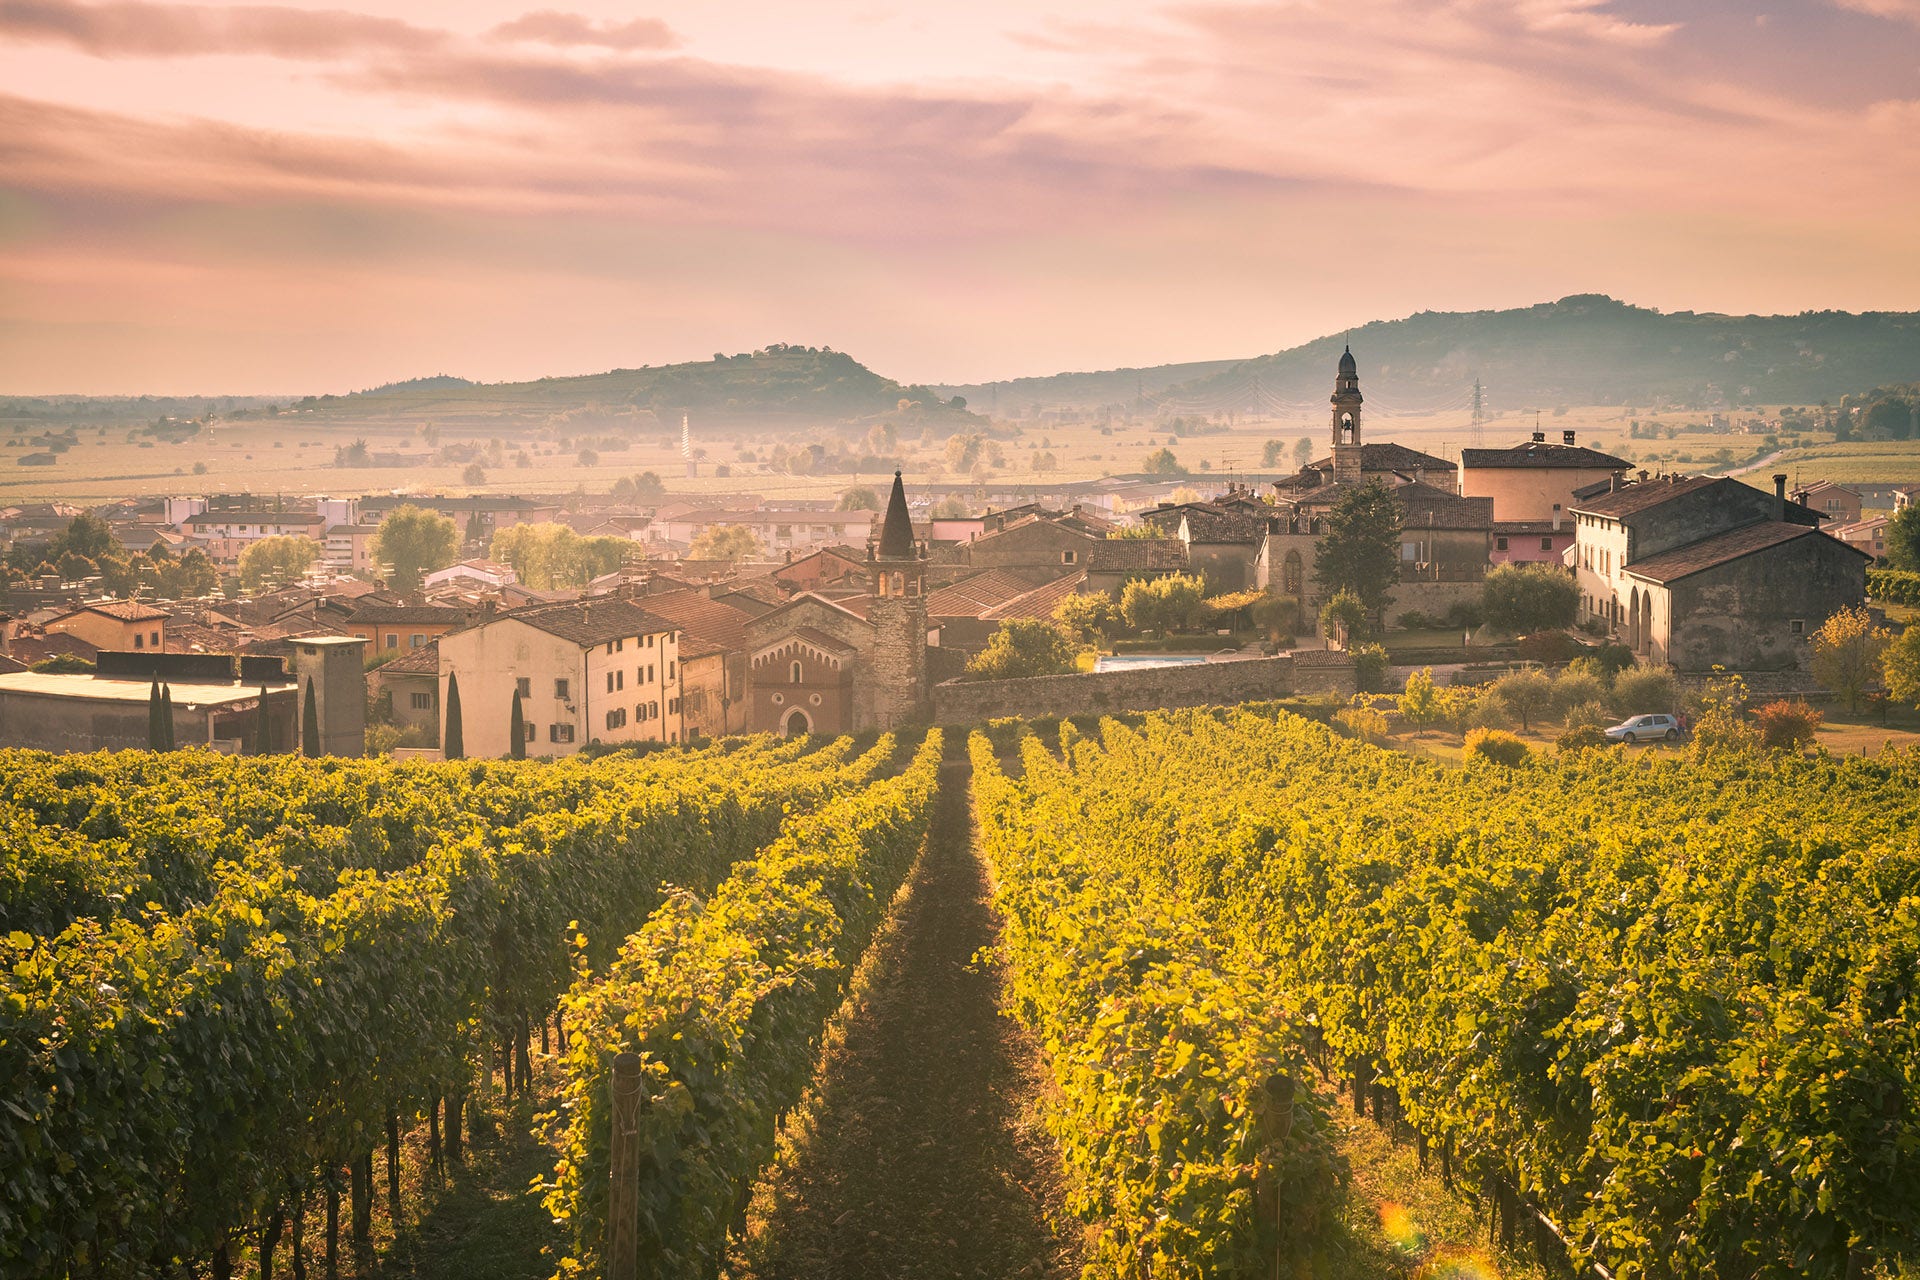 Vineyards in foreground, hazy Italian town in background